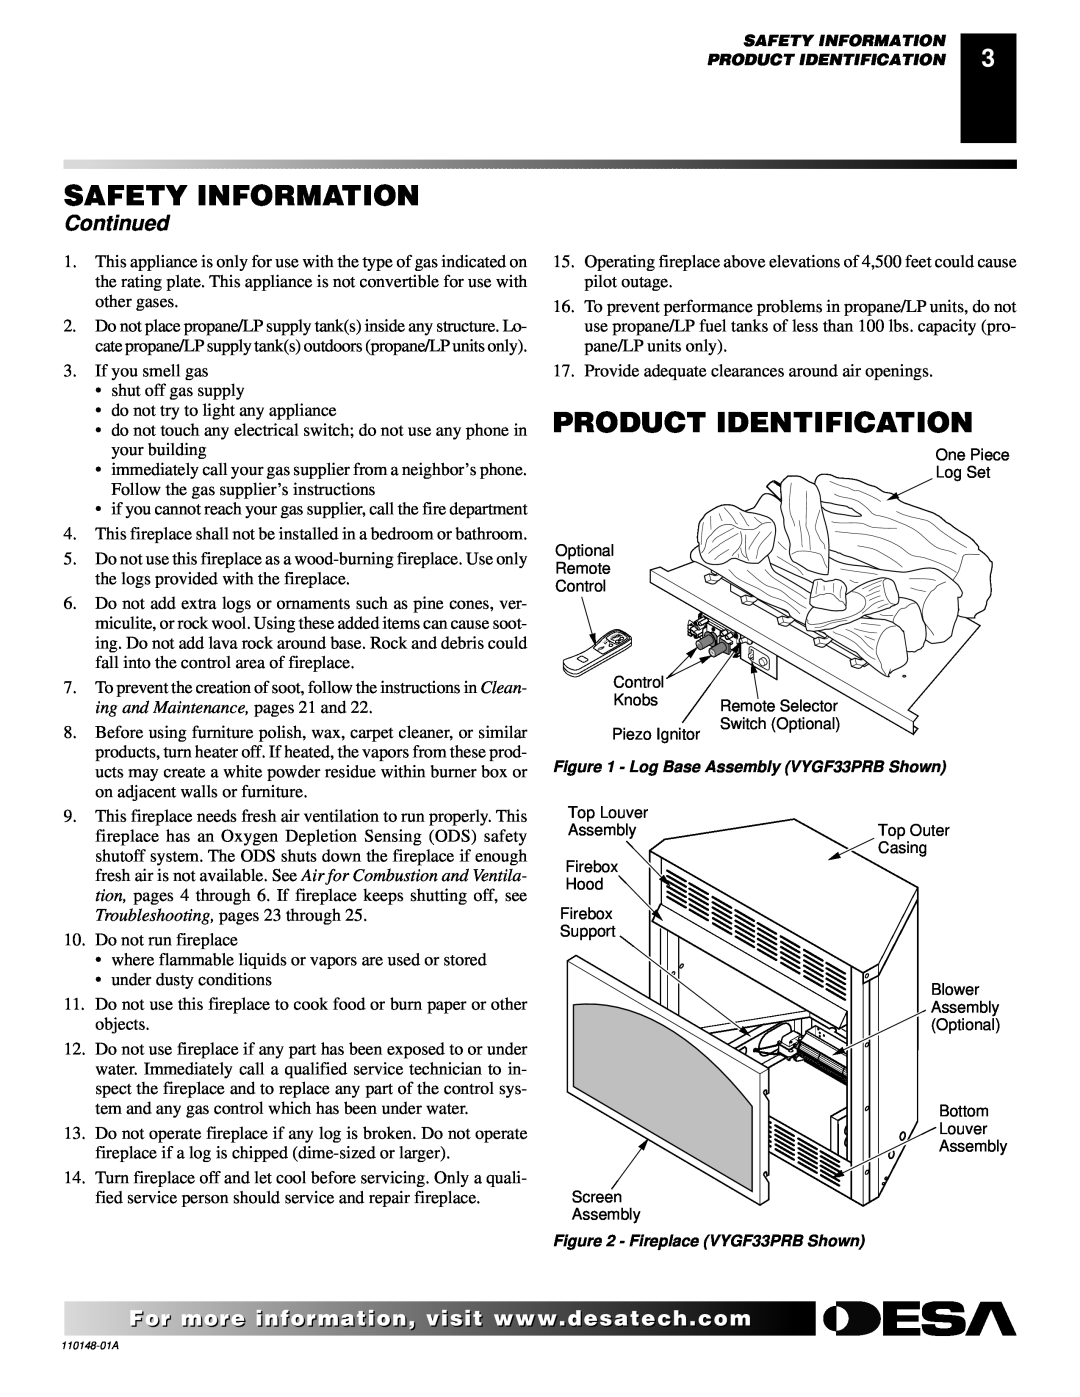 Desa VYGF33NRB, VYGF33PRB Product Identification, Continued, ing and Maintenance, pages 21 and, Safety Information 